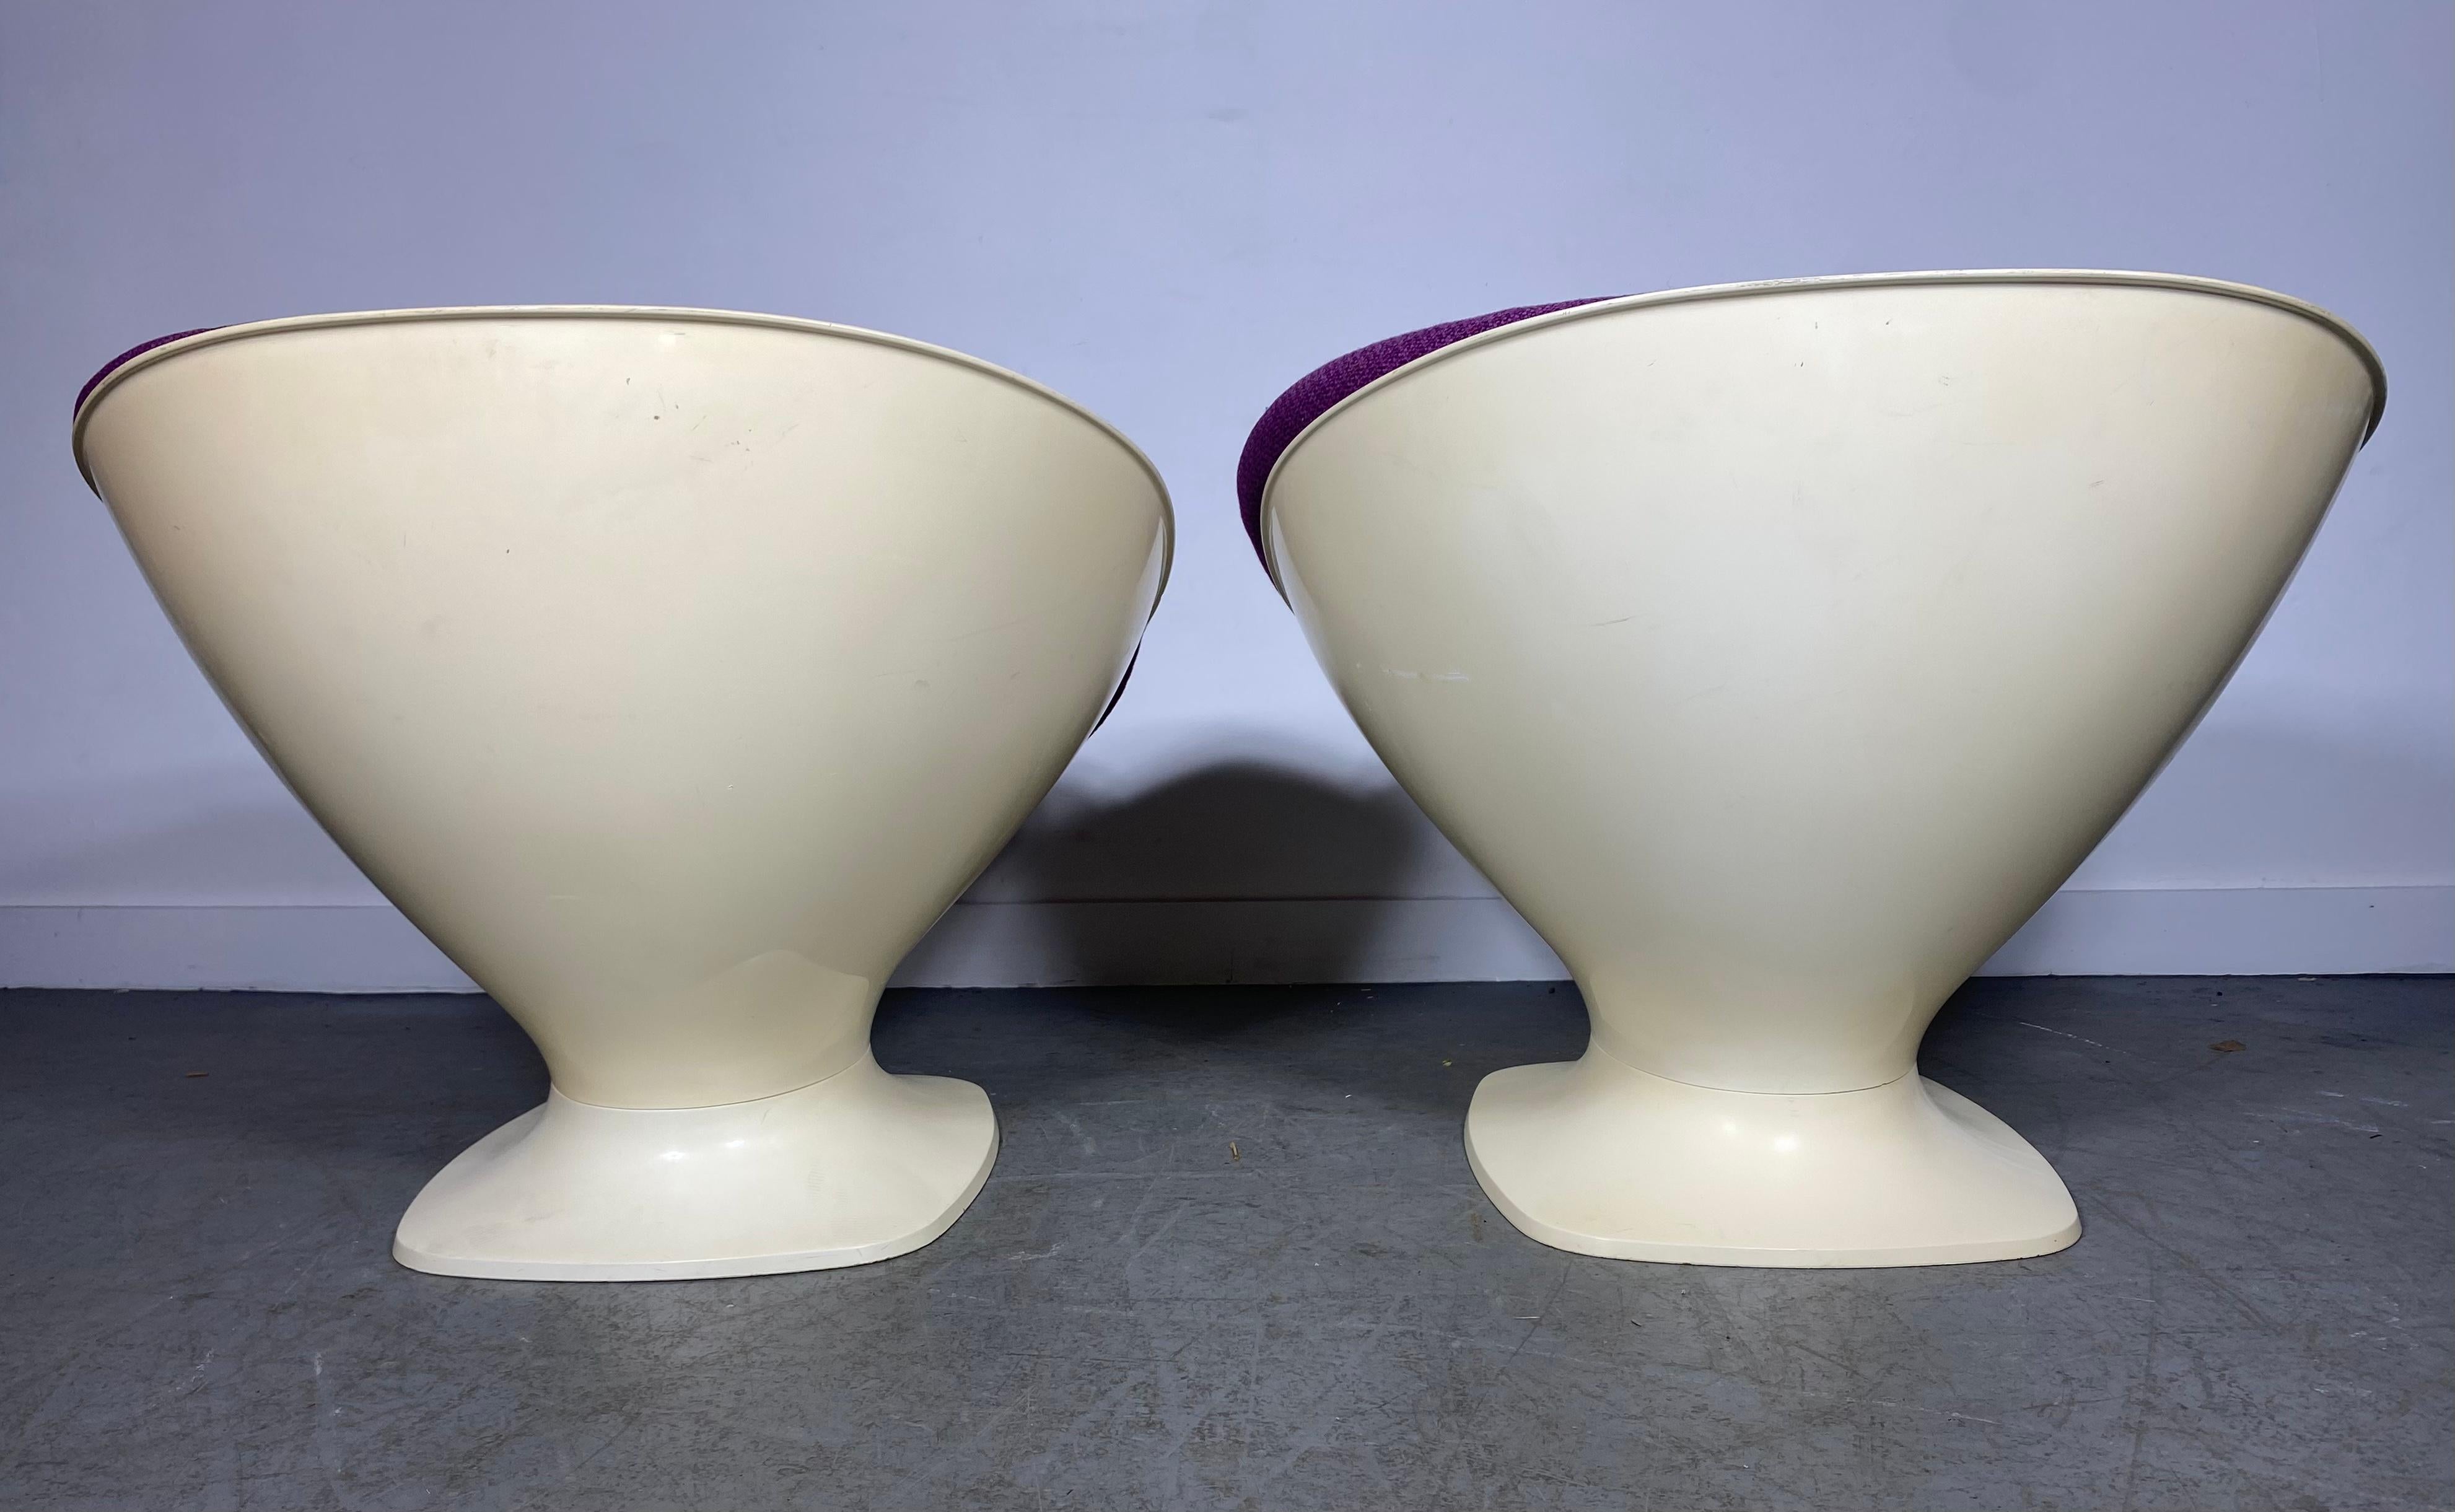 Mid-Century Modern / Space Age vintage plastic club chairs, designed by Raphael Raffel (Rafael), France, 1970s
The club chair features a tulip form with a rounded seat, which is reupholstered and covered with fabric and also shows a loose